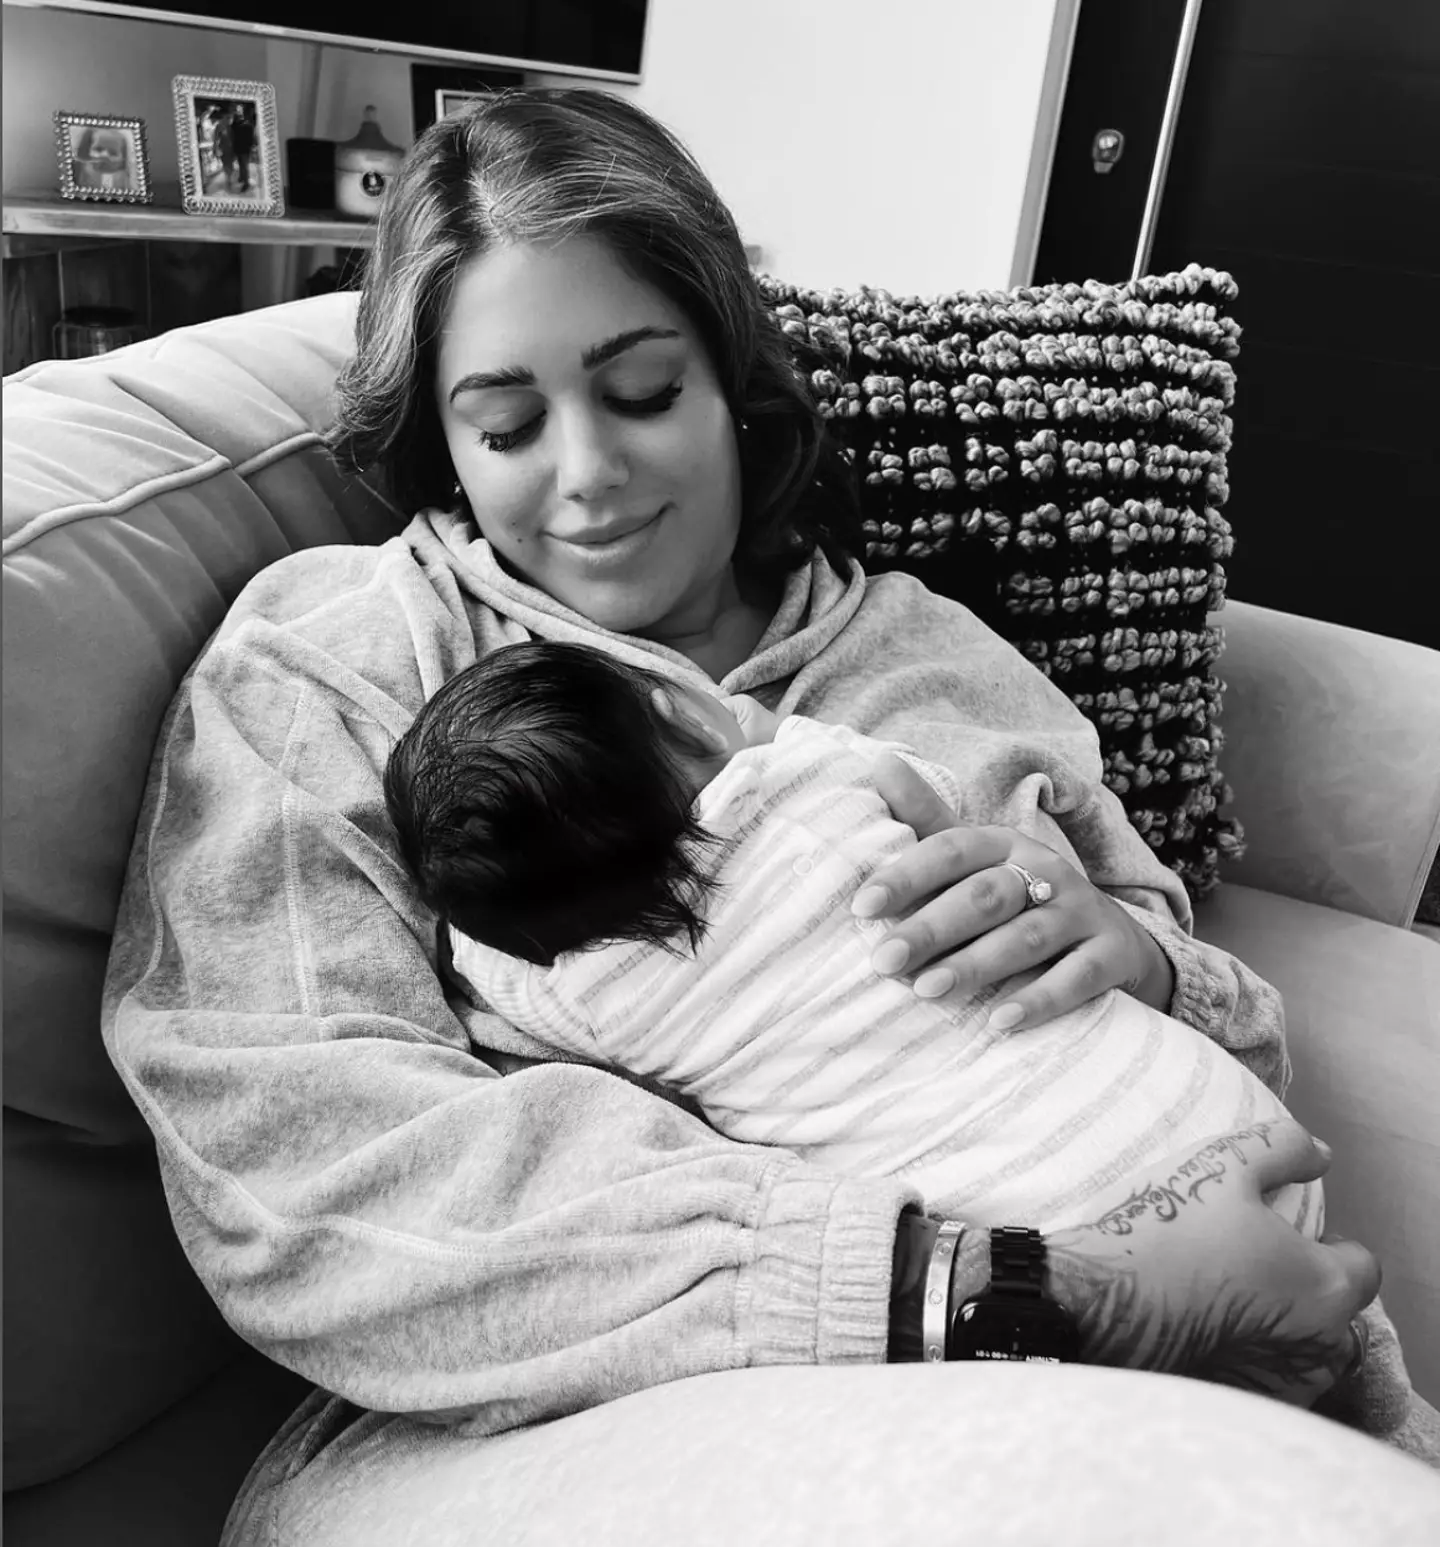 Malin welcomed a daughter named Xaya in January (